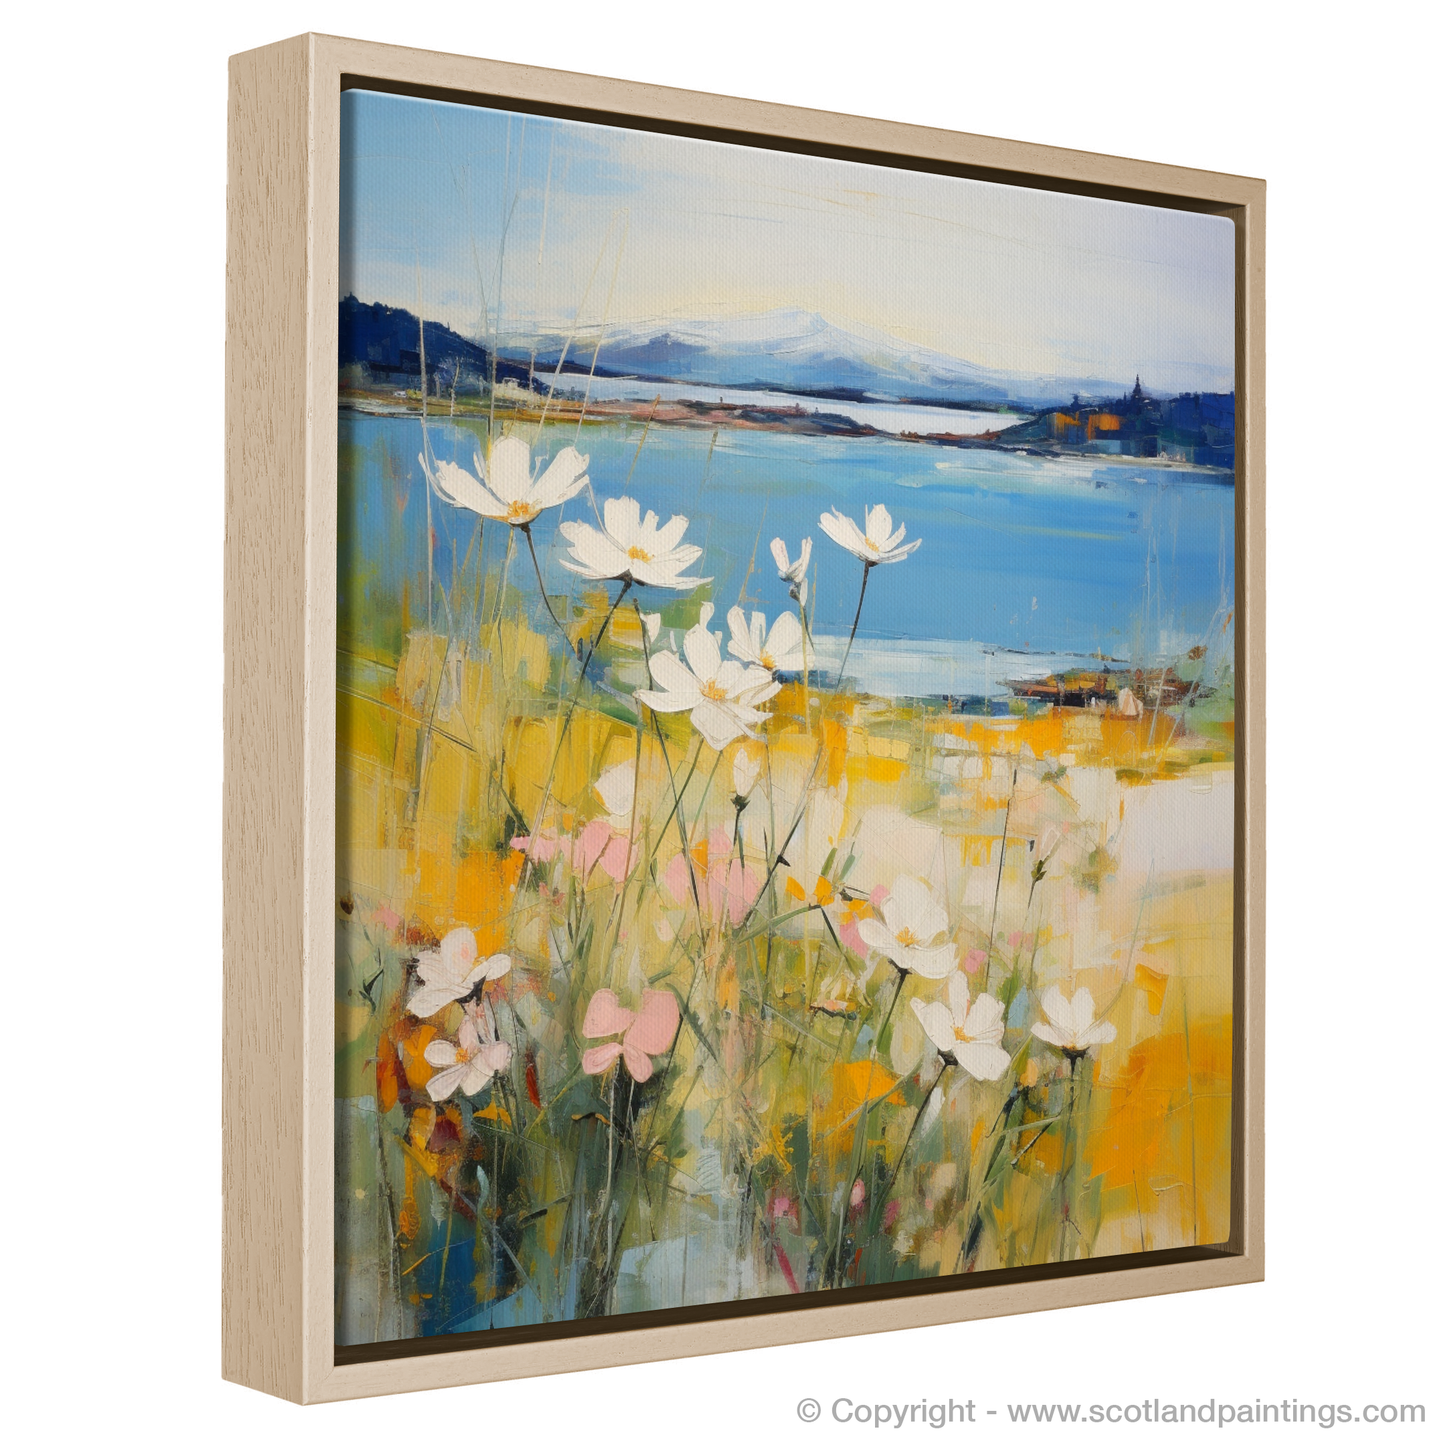 Painting and Art Print of Wildflowers by Loch Lomond entitled "Wildflowers Waltz by Loch Lomond".